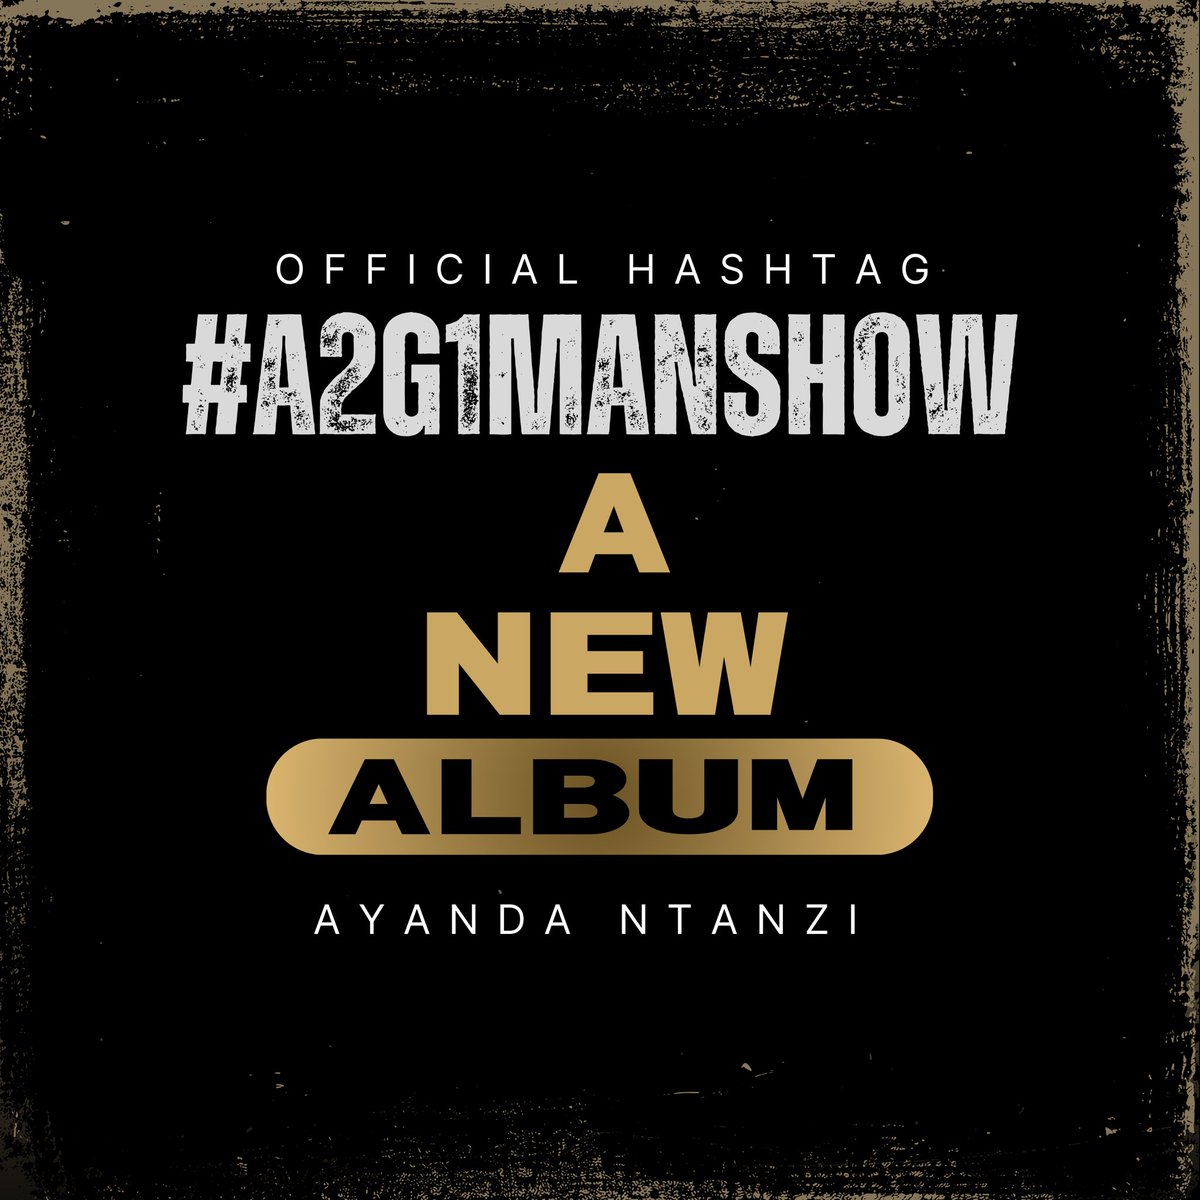 Let’s spread the word and stay connected with this hashtag ⚜️ #a2g1manshow #a2g1manshow #albumdrop #album #ayandantanzi #newmusic #may #gospel #princeofkoko